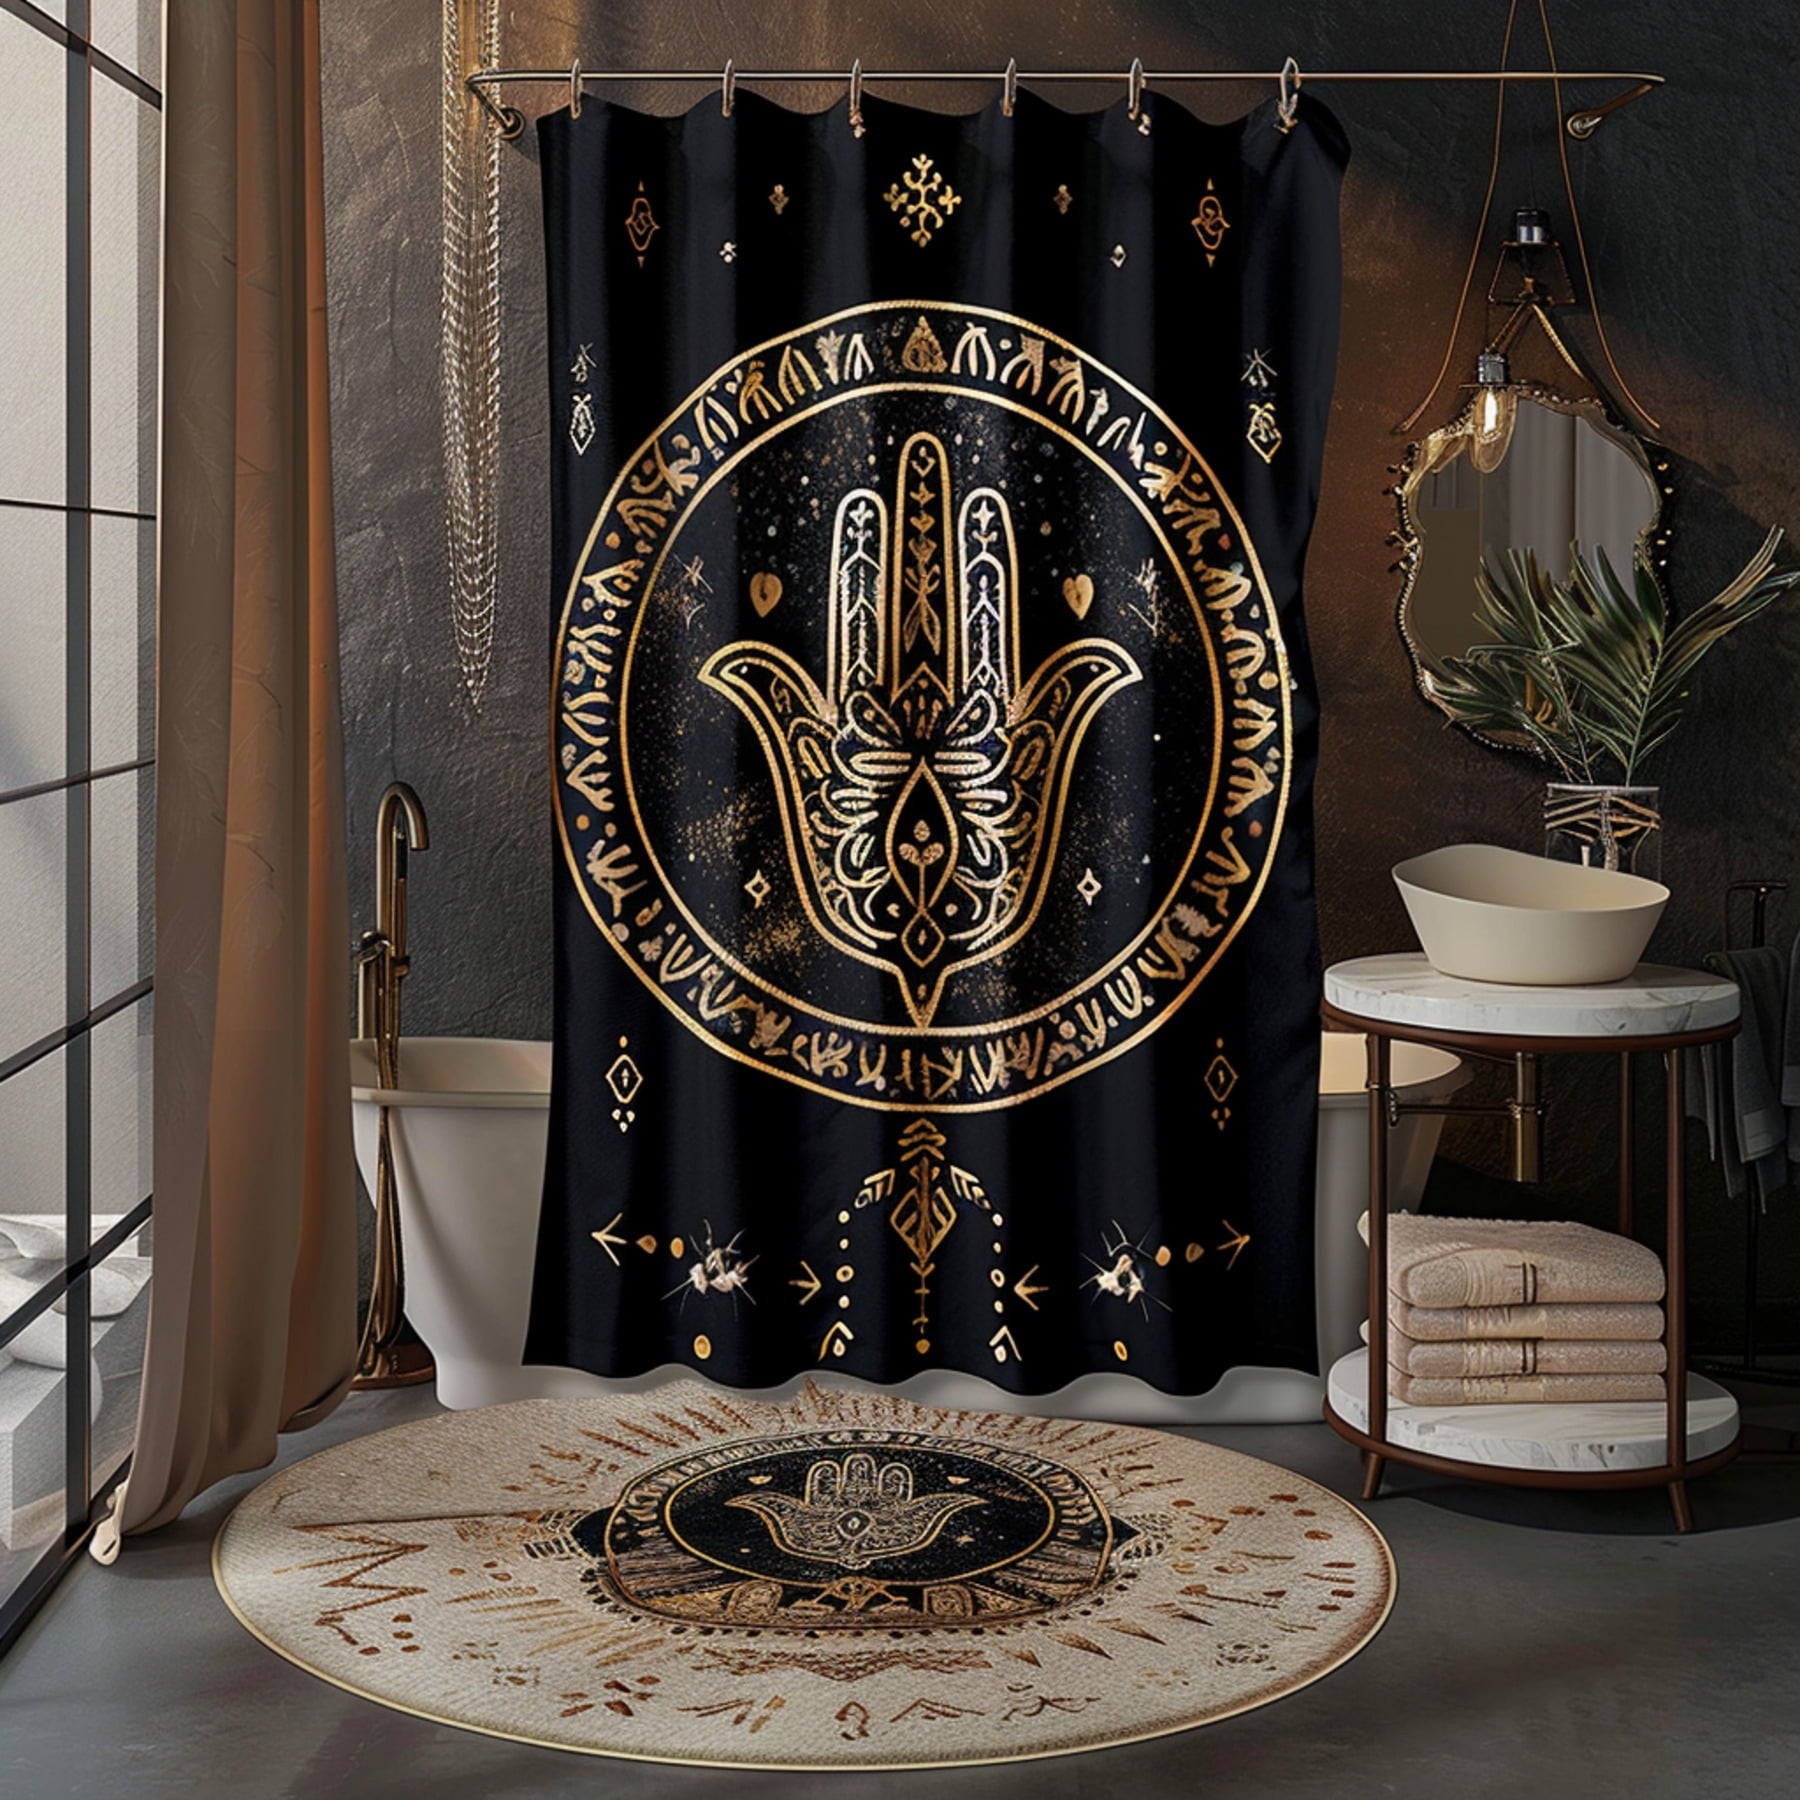 Handprint Design Shower Curtain with Occult Symbols and Mystical Shapes ...